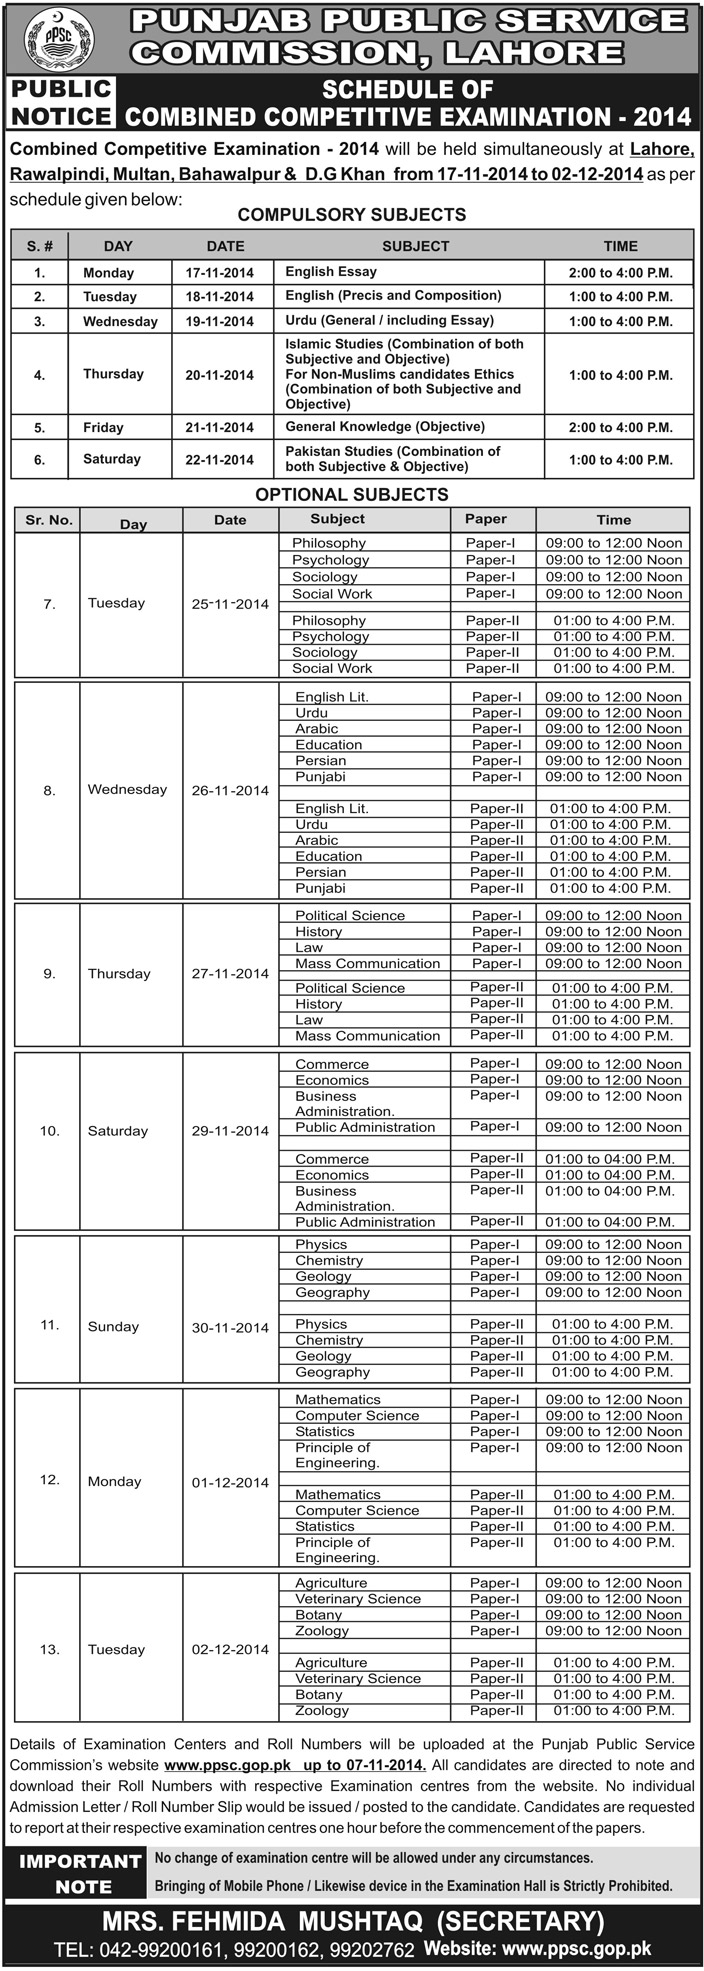 PPSC announced New Data Sheet of PMS Exam 2014 (Combined Competitive Examination) 